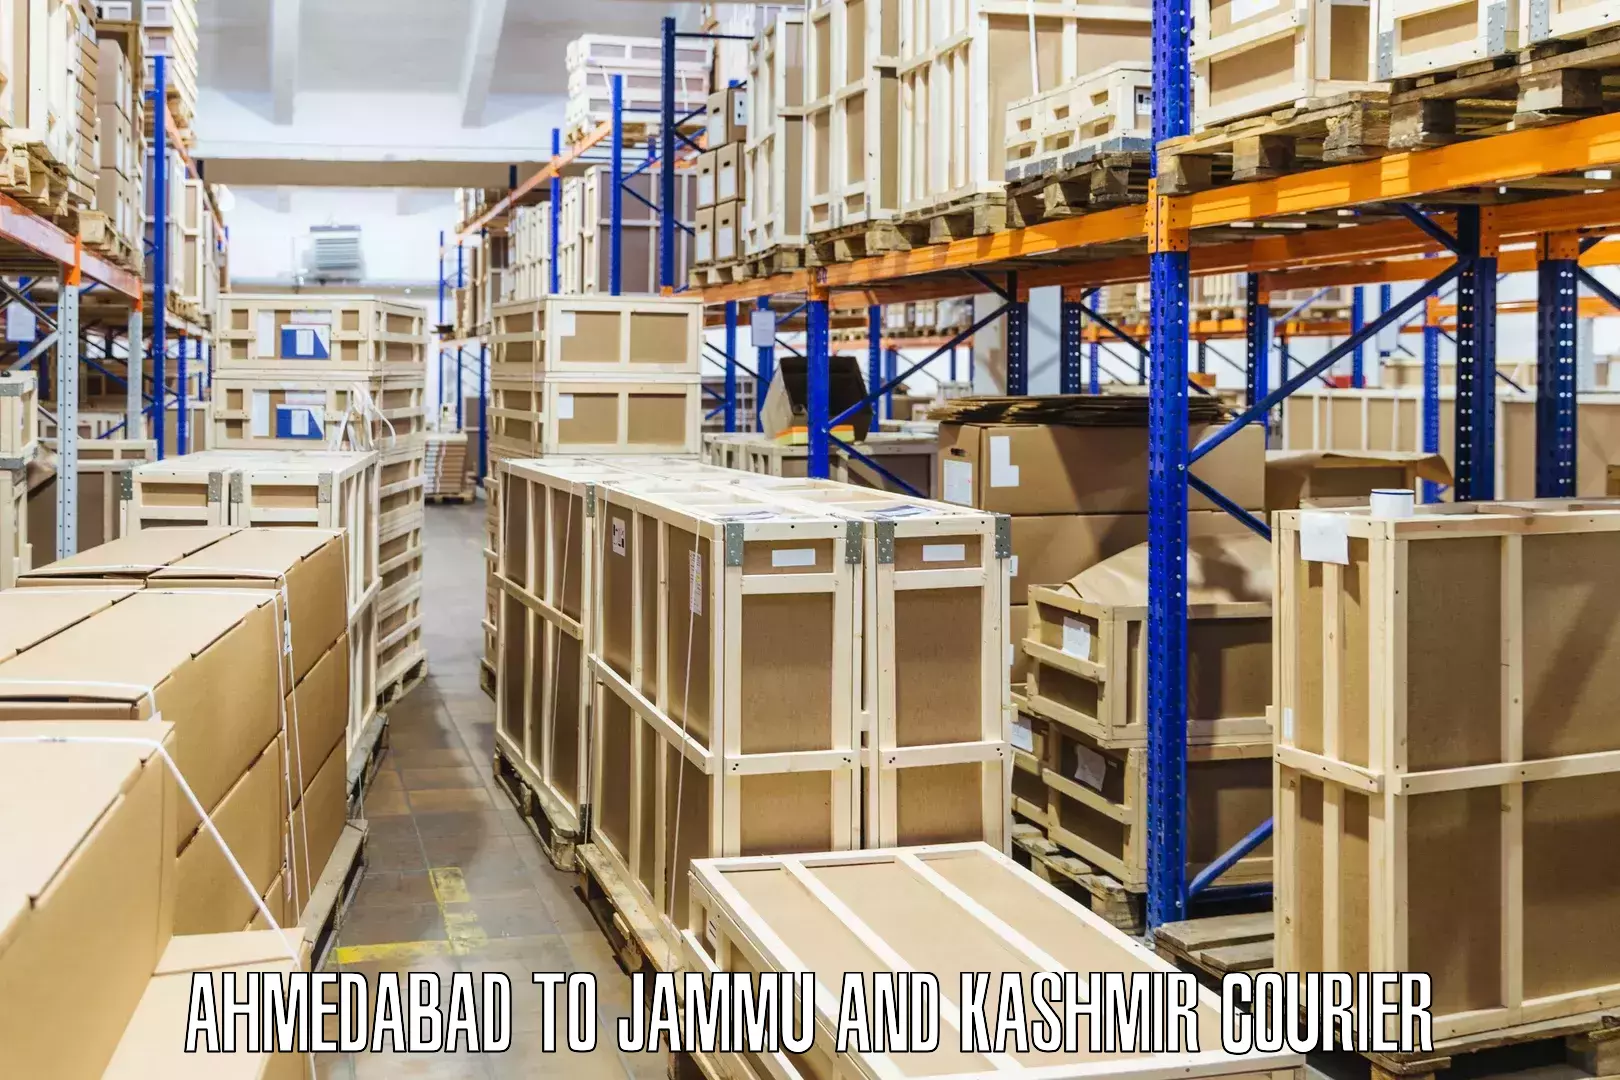 Express delivery capabilities Ahmedabad to Jammu and Kashmir